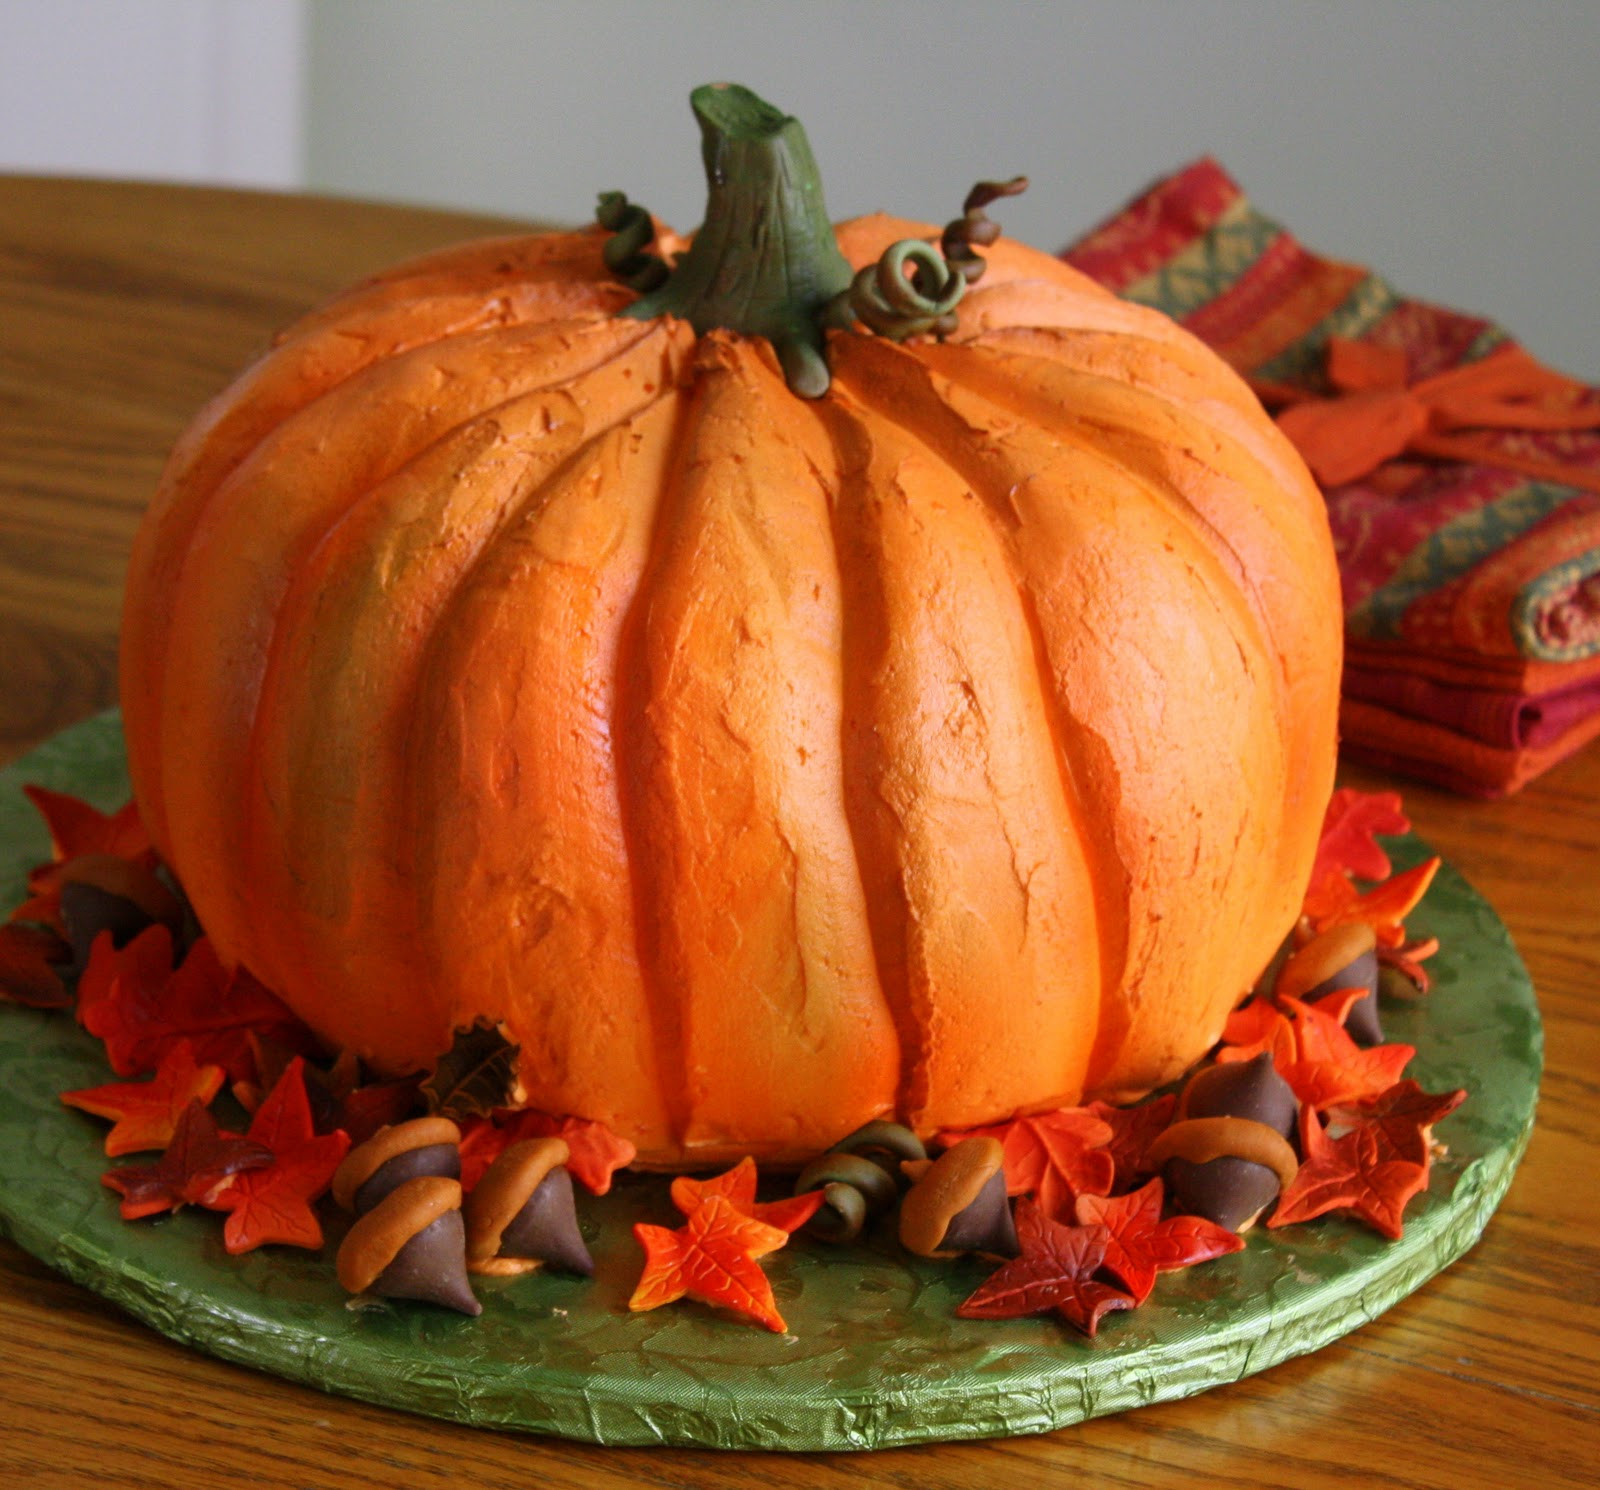 Halloween Pumkin Cakes
 Jane s Sweets & Baking Journal The Cake that Thinks it s